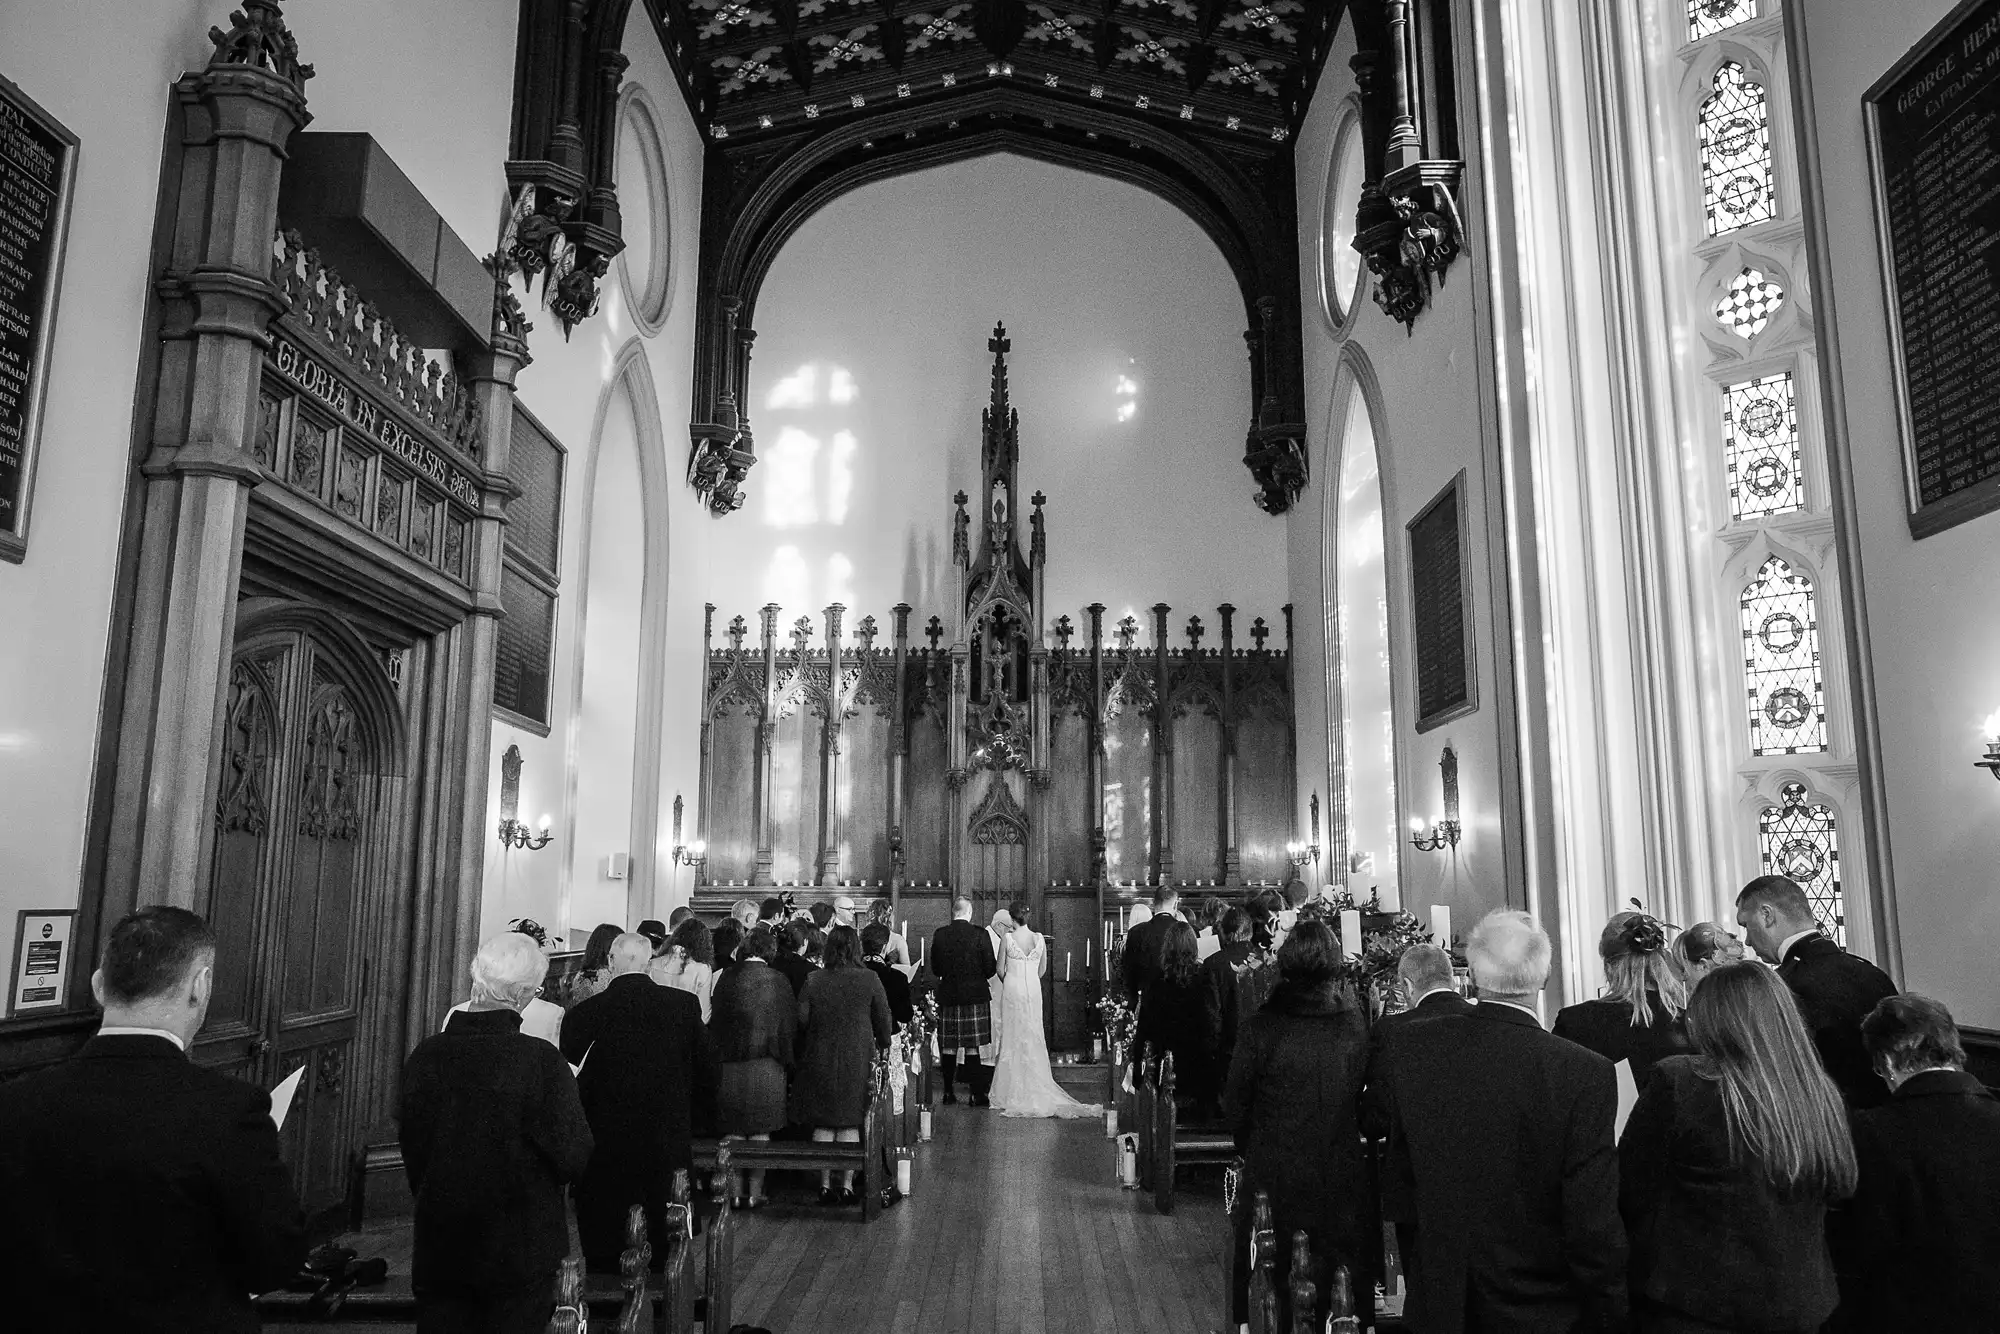 A black and white photo capturing a wedding ceremony inside a traditional church with guests standing as the bride and groom walk down the aisle.